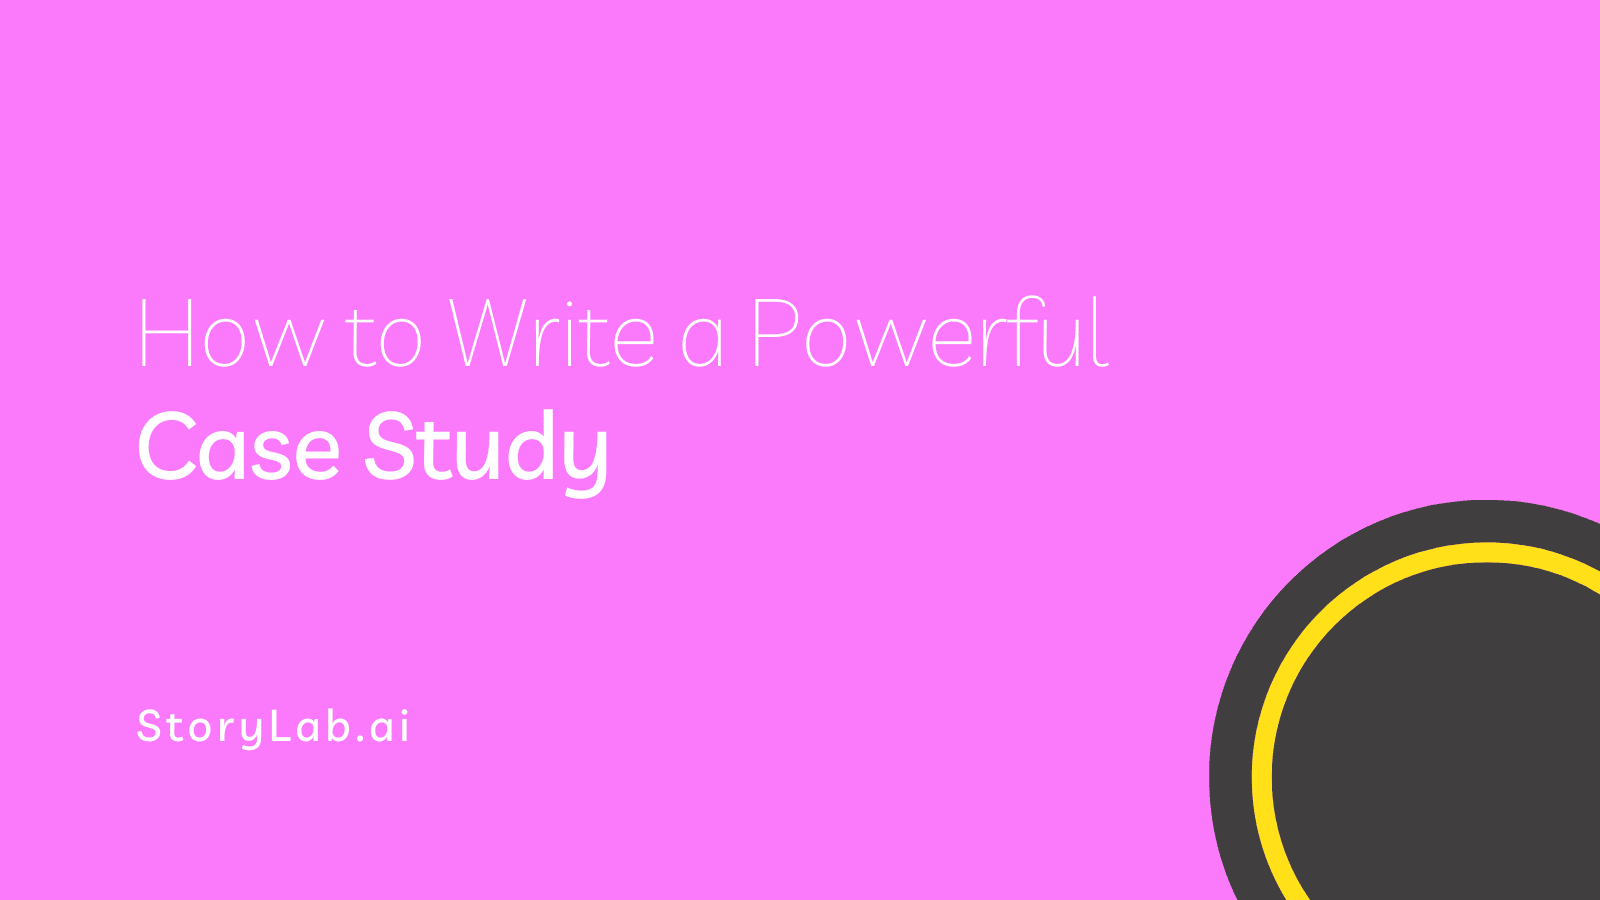 How to Write a Powerful Case Study